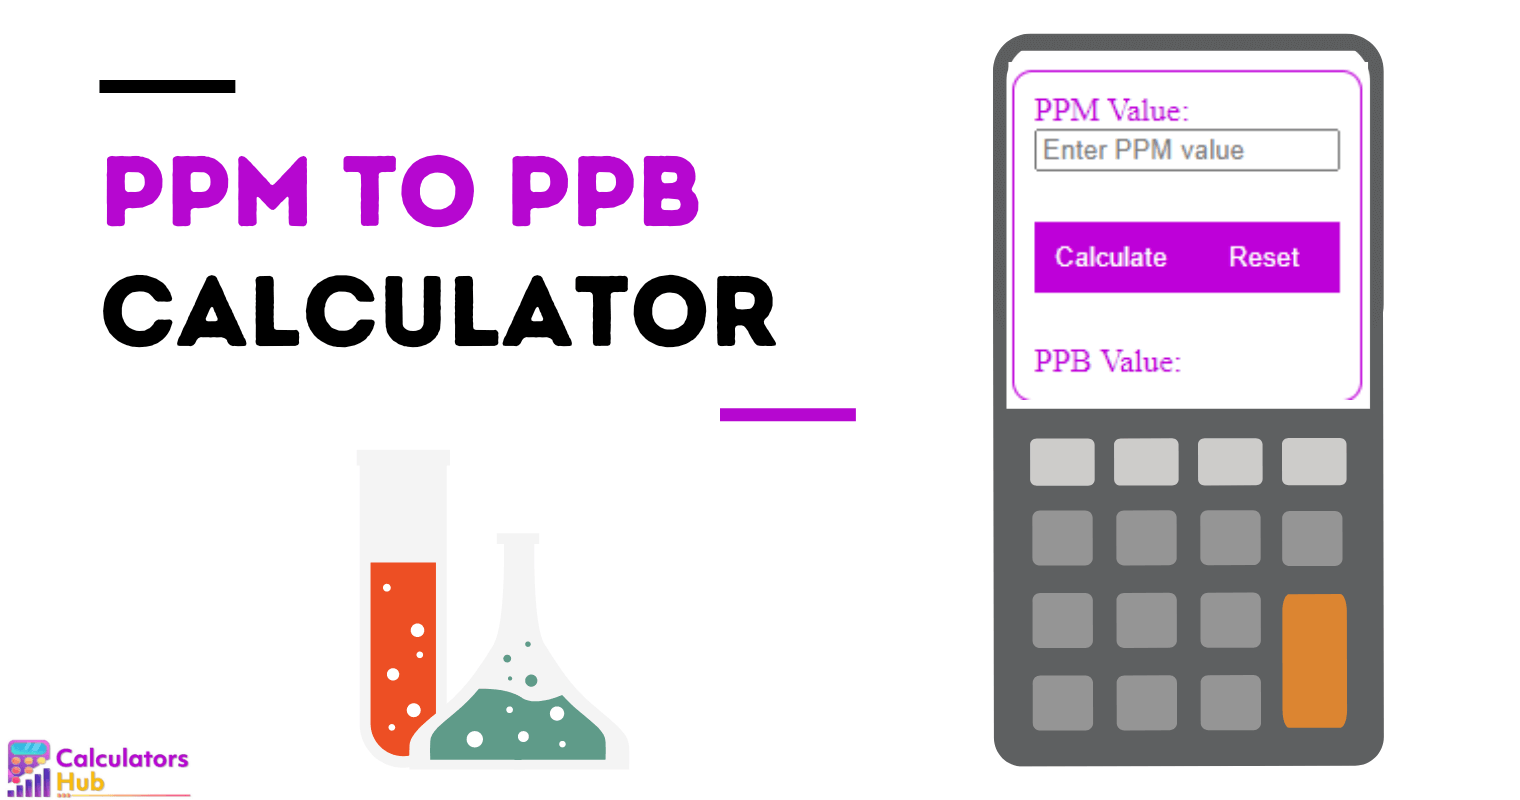 PPM to PPB Calculator